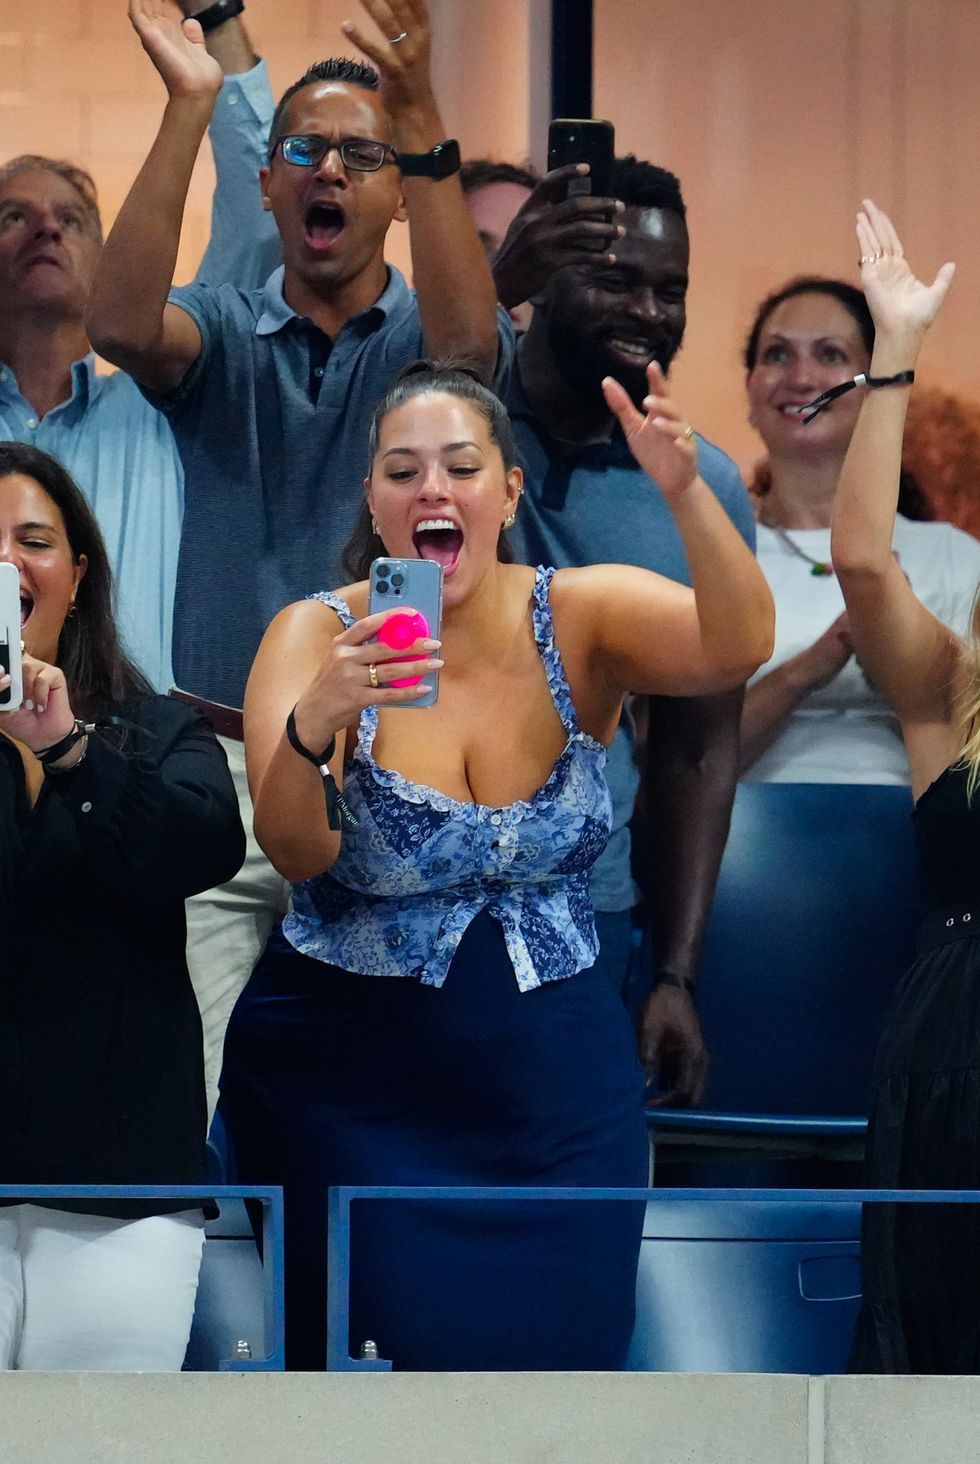 Hollywood's Public Style Figures Present at the 2022 US Open